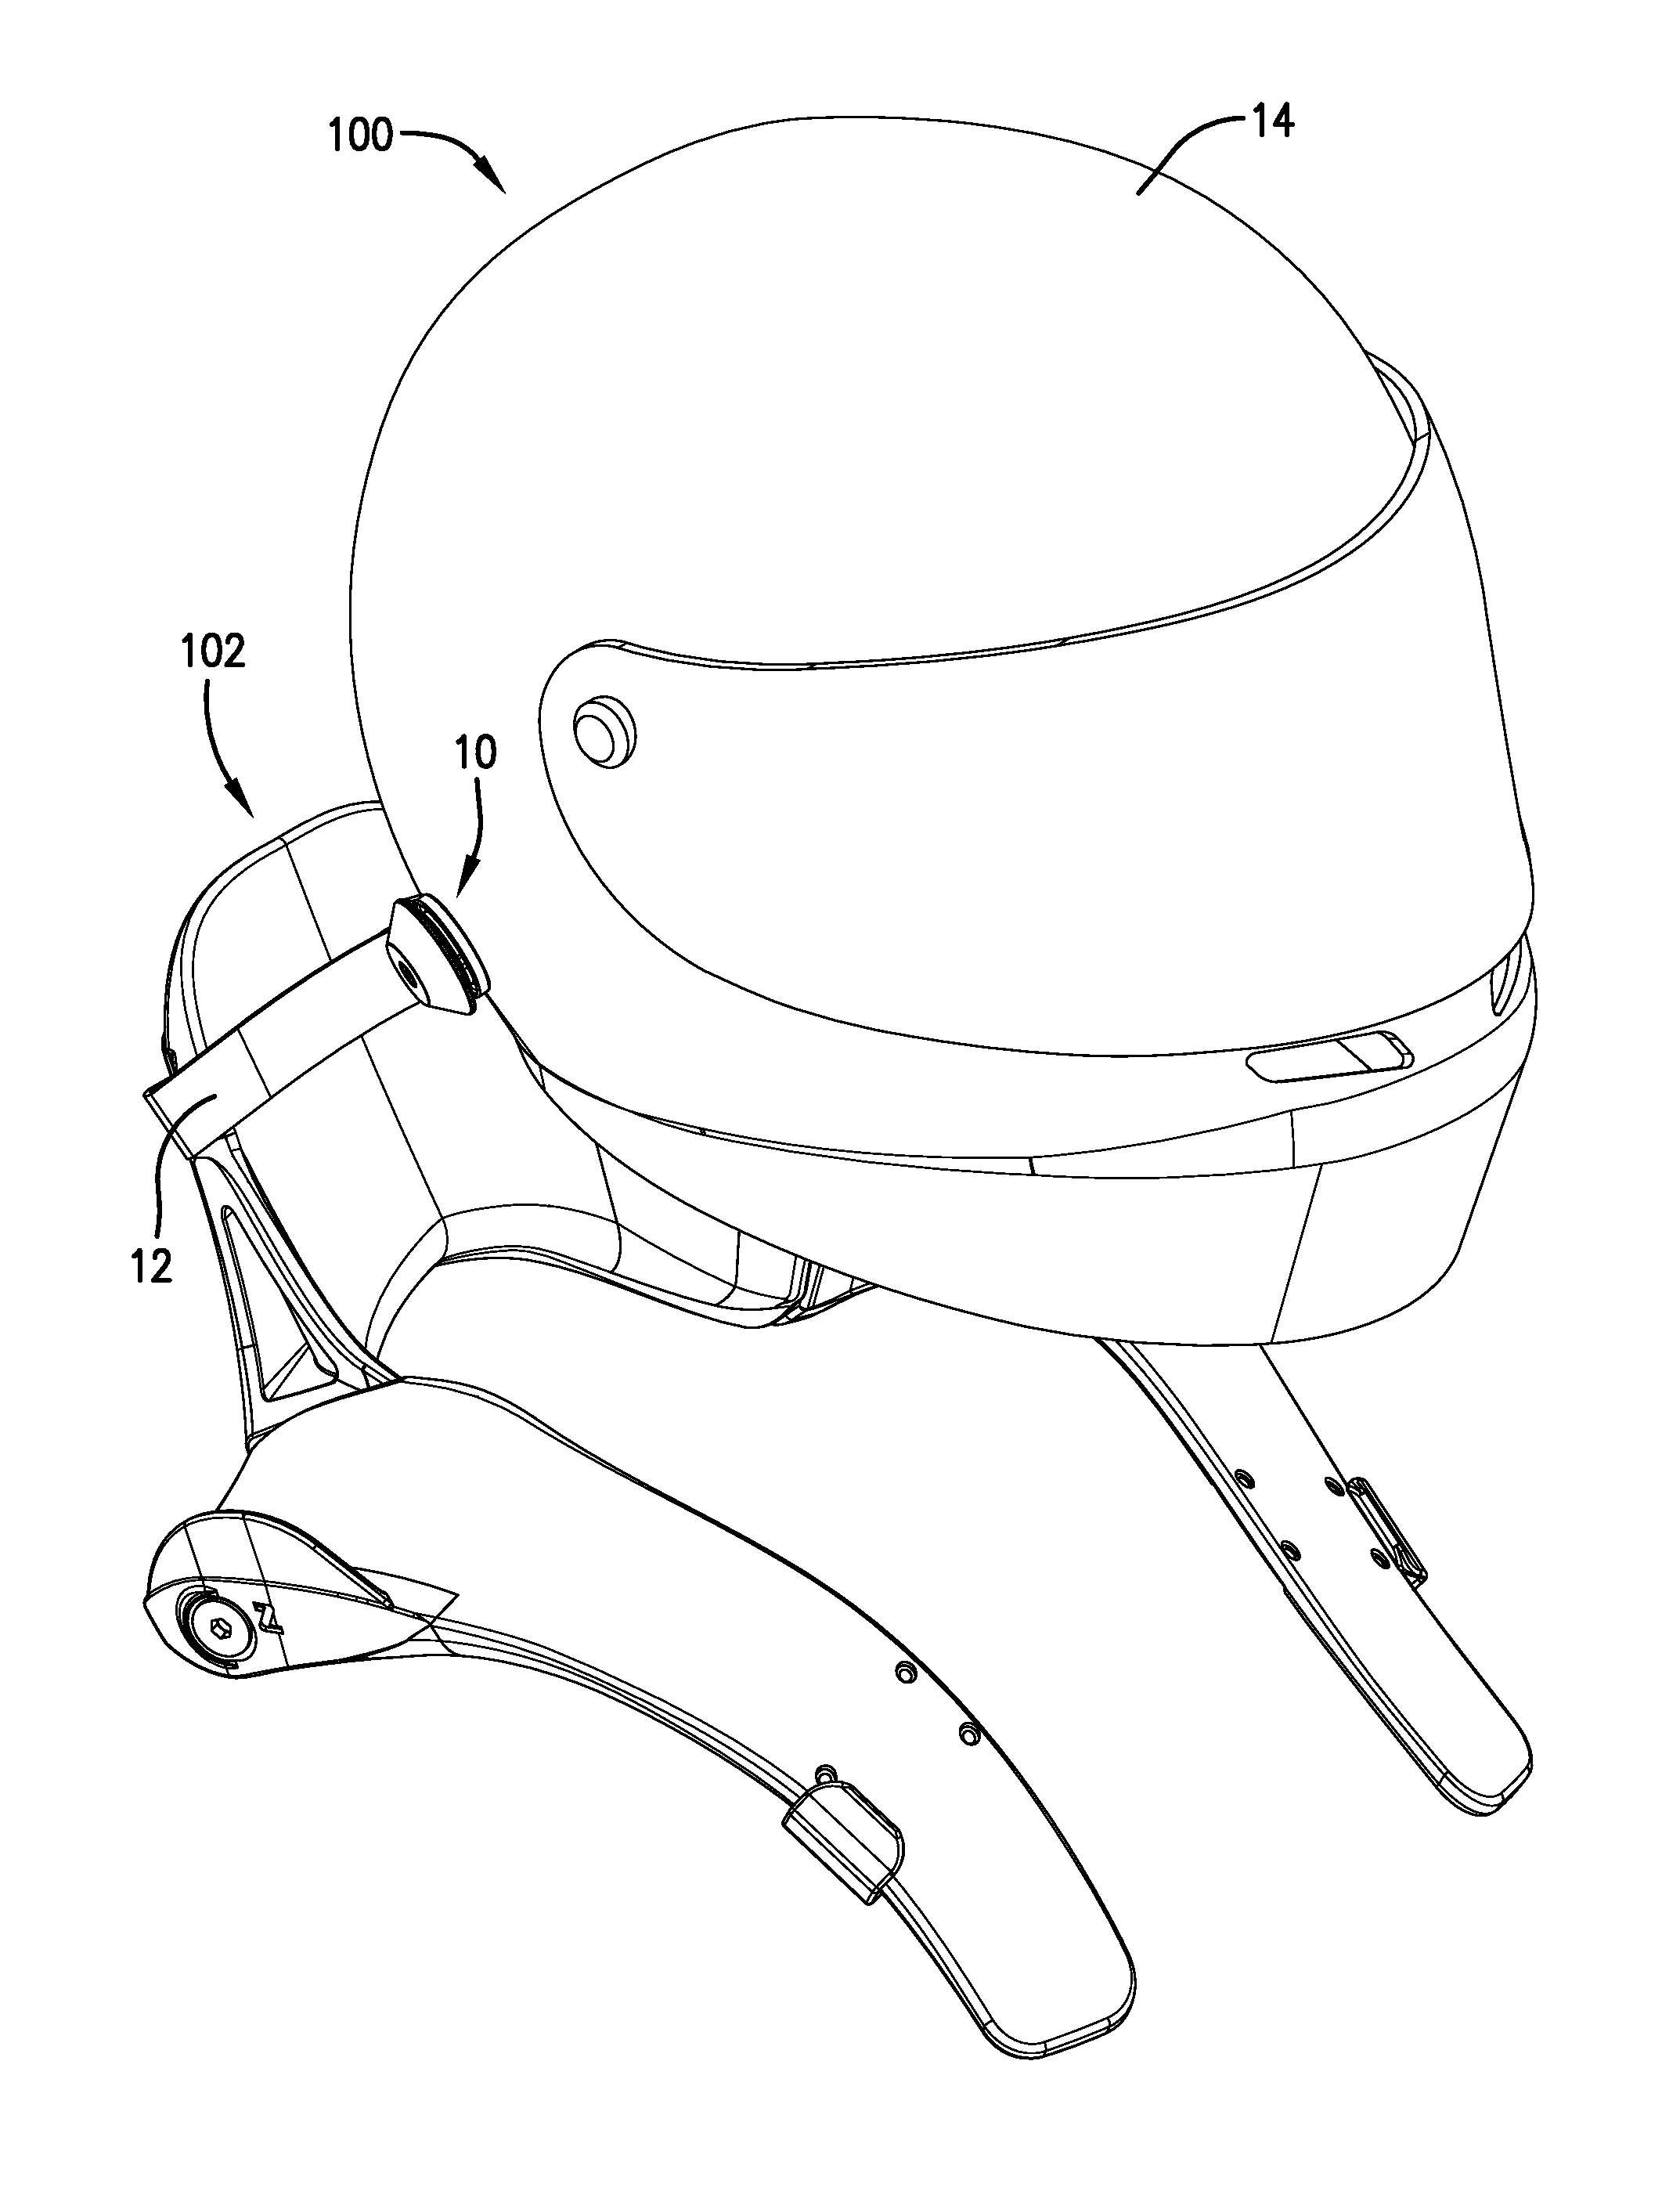 Quick release device for safety helmet